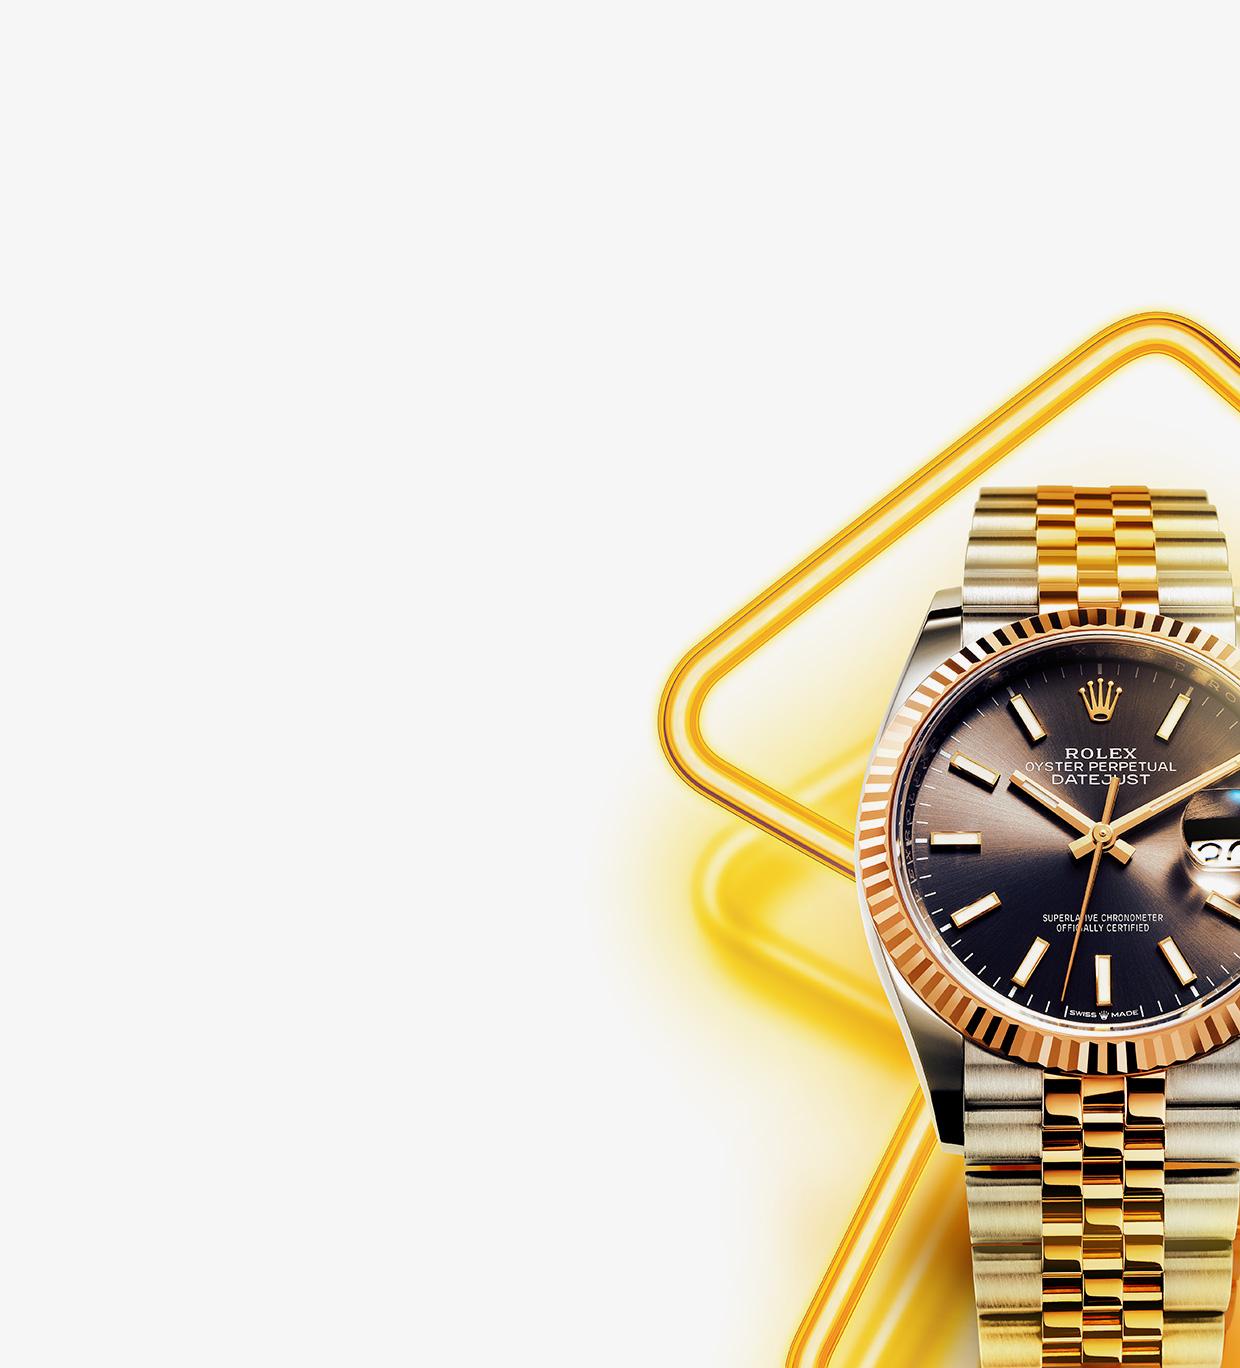 Rolex Watch under yellow neon light – showcasing advanced post production and 3D/CGI neon light effects